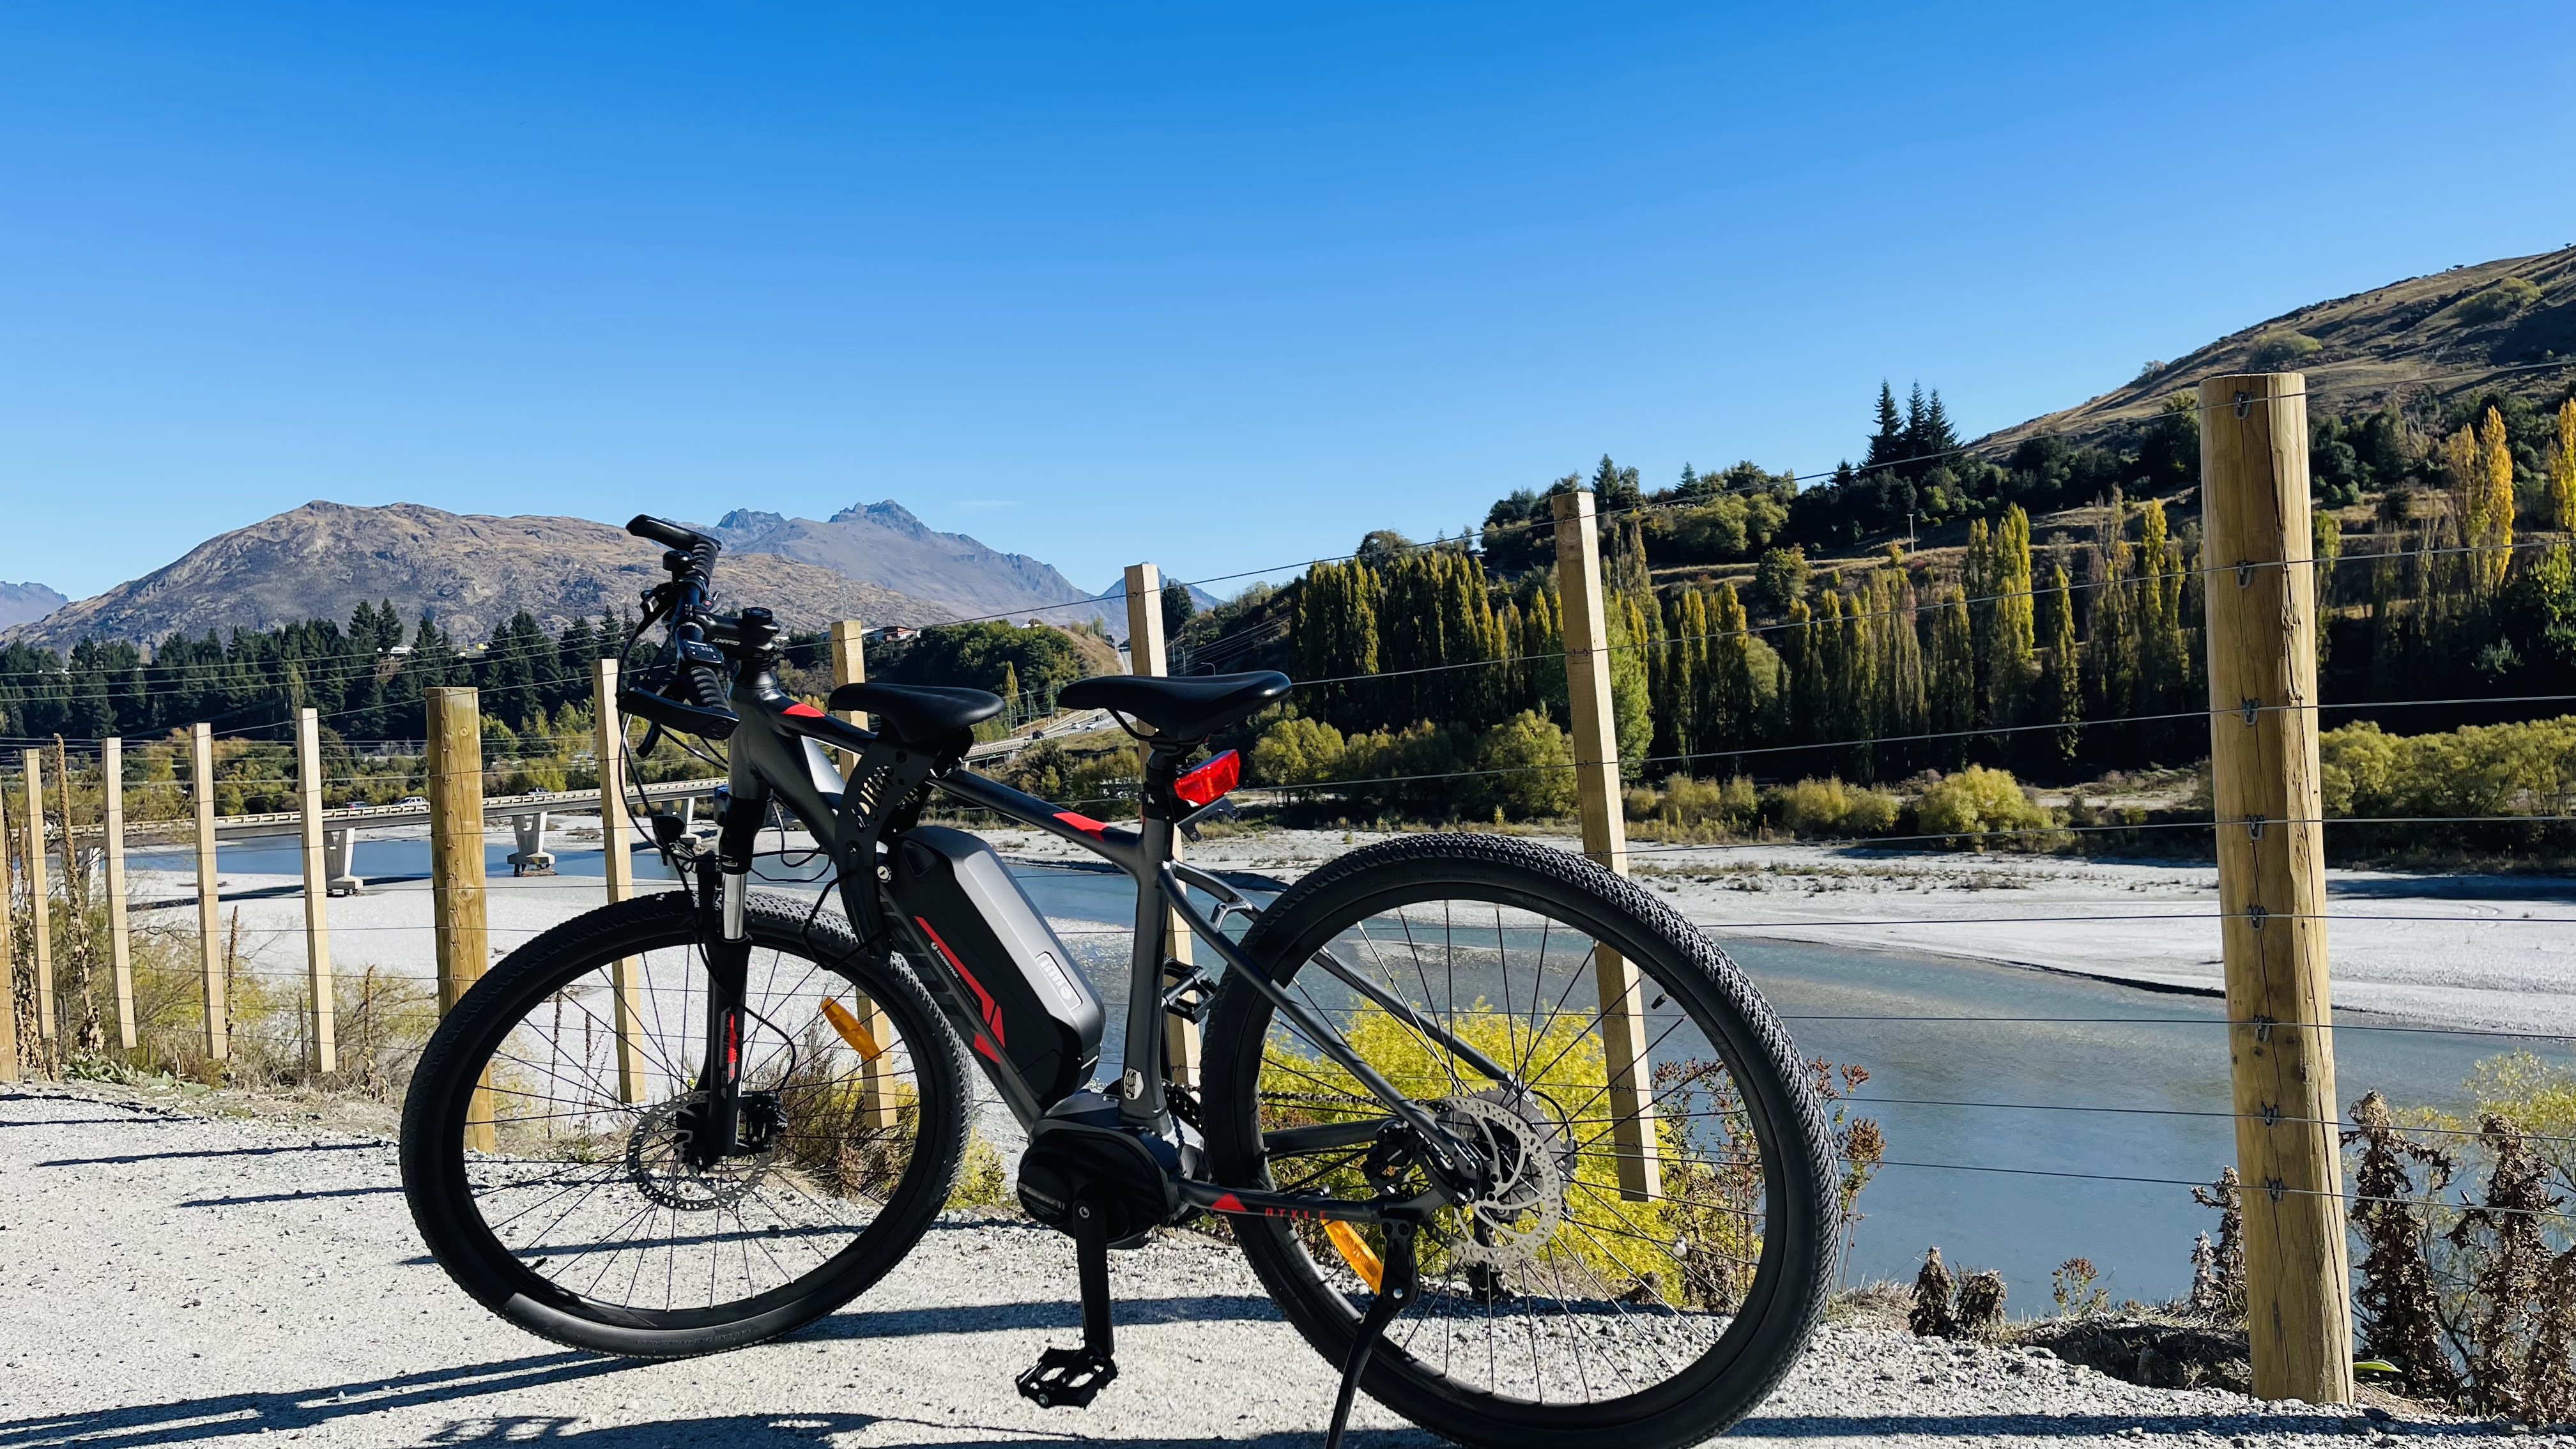 Discover Queenstown at your own pace with comfort and ease on our Brand New Giant Electric Bikes. 